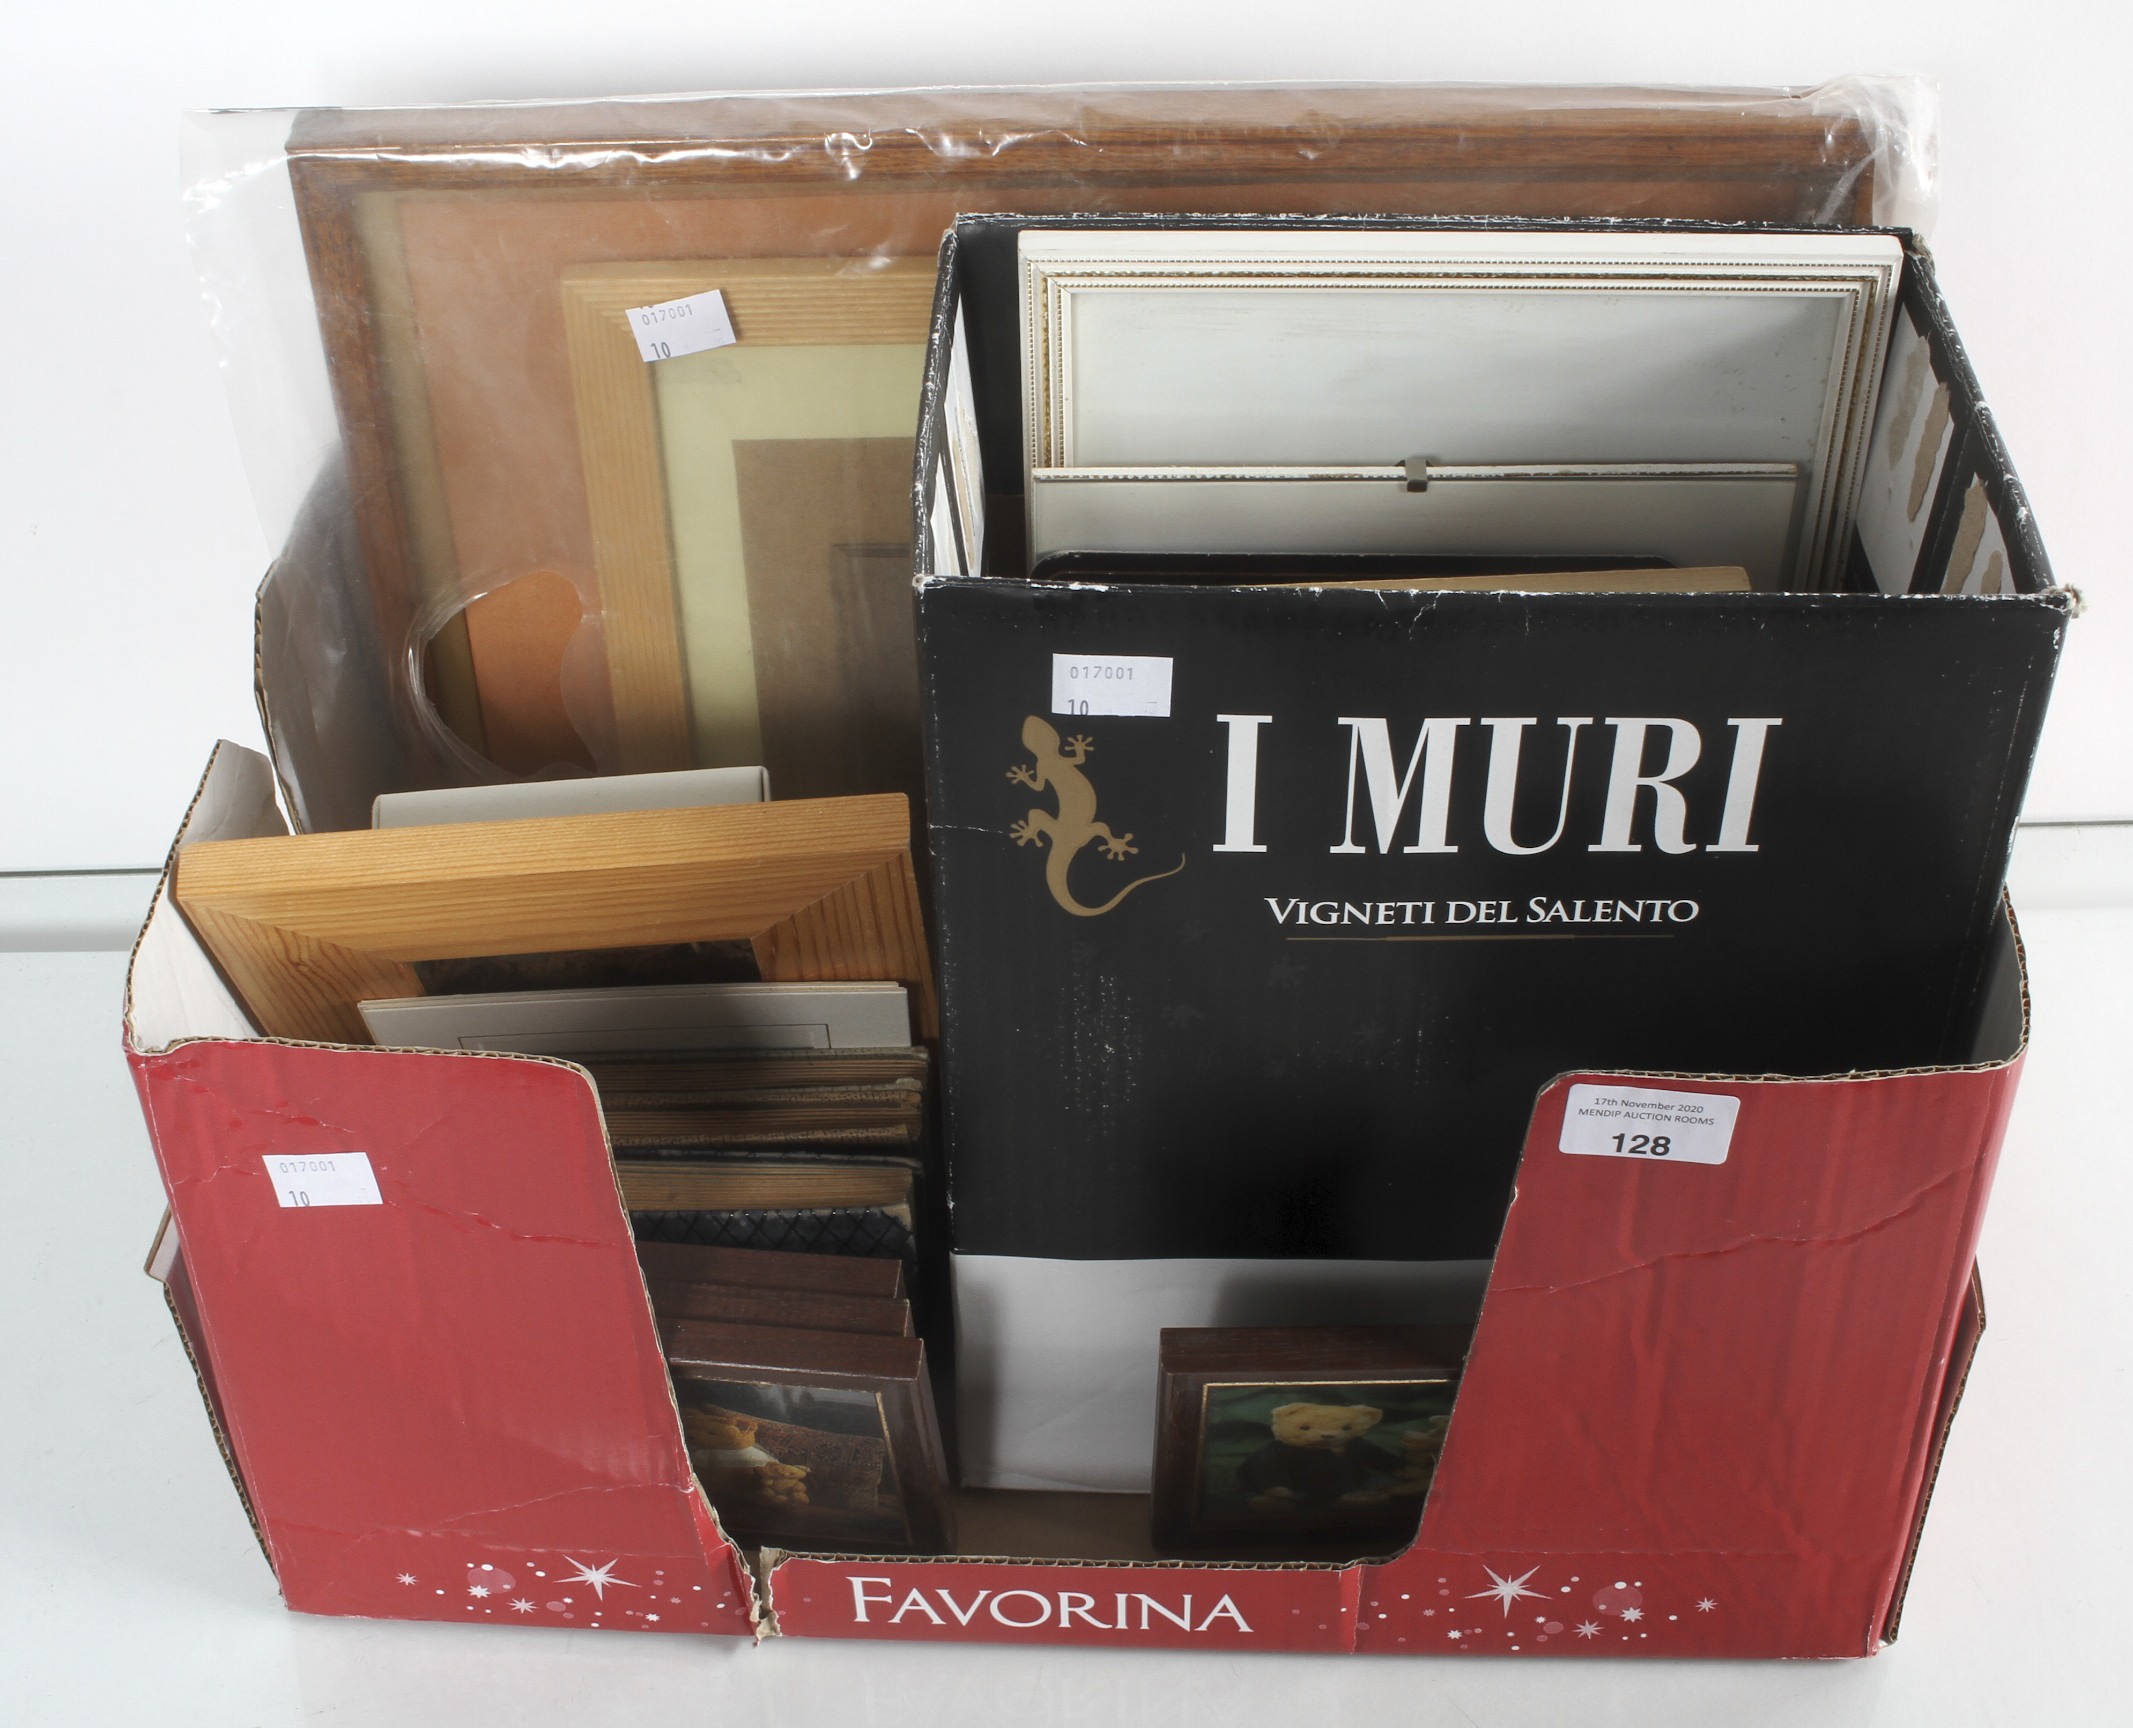 A box of frames in wood and two period photograph albums